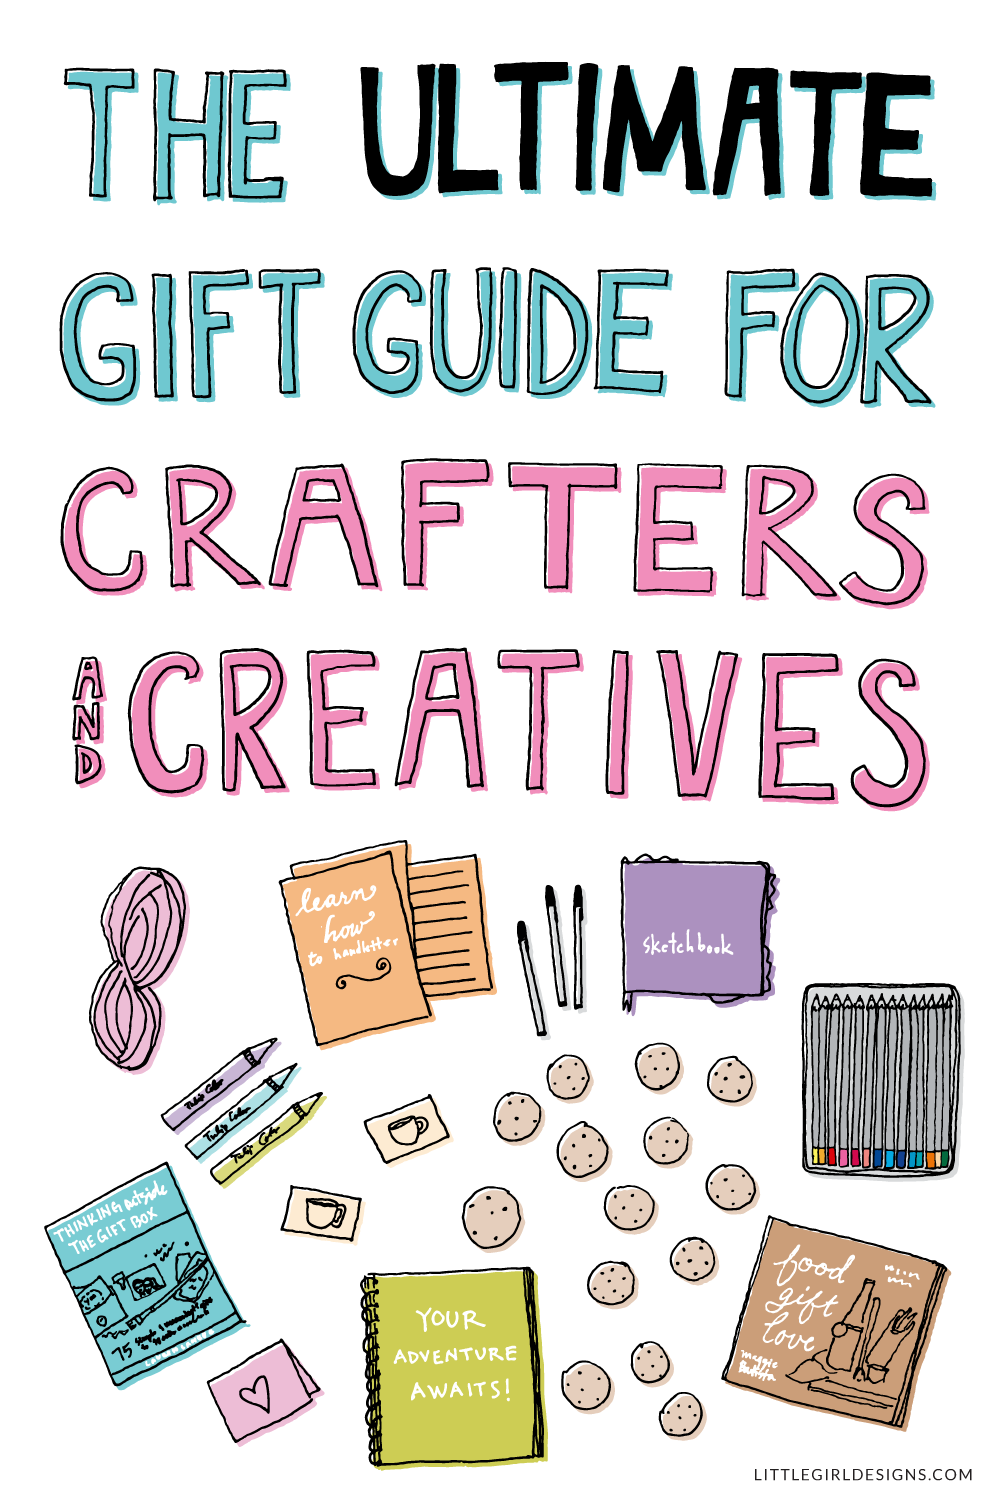 The Ultimate Gift Guide for Crafters and Creatives